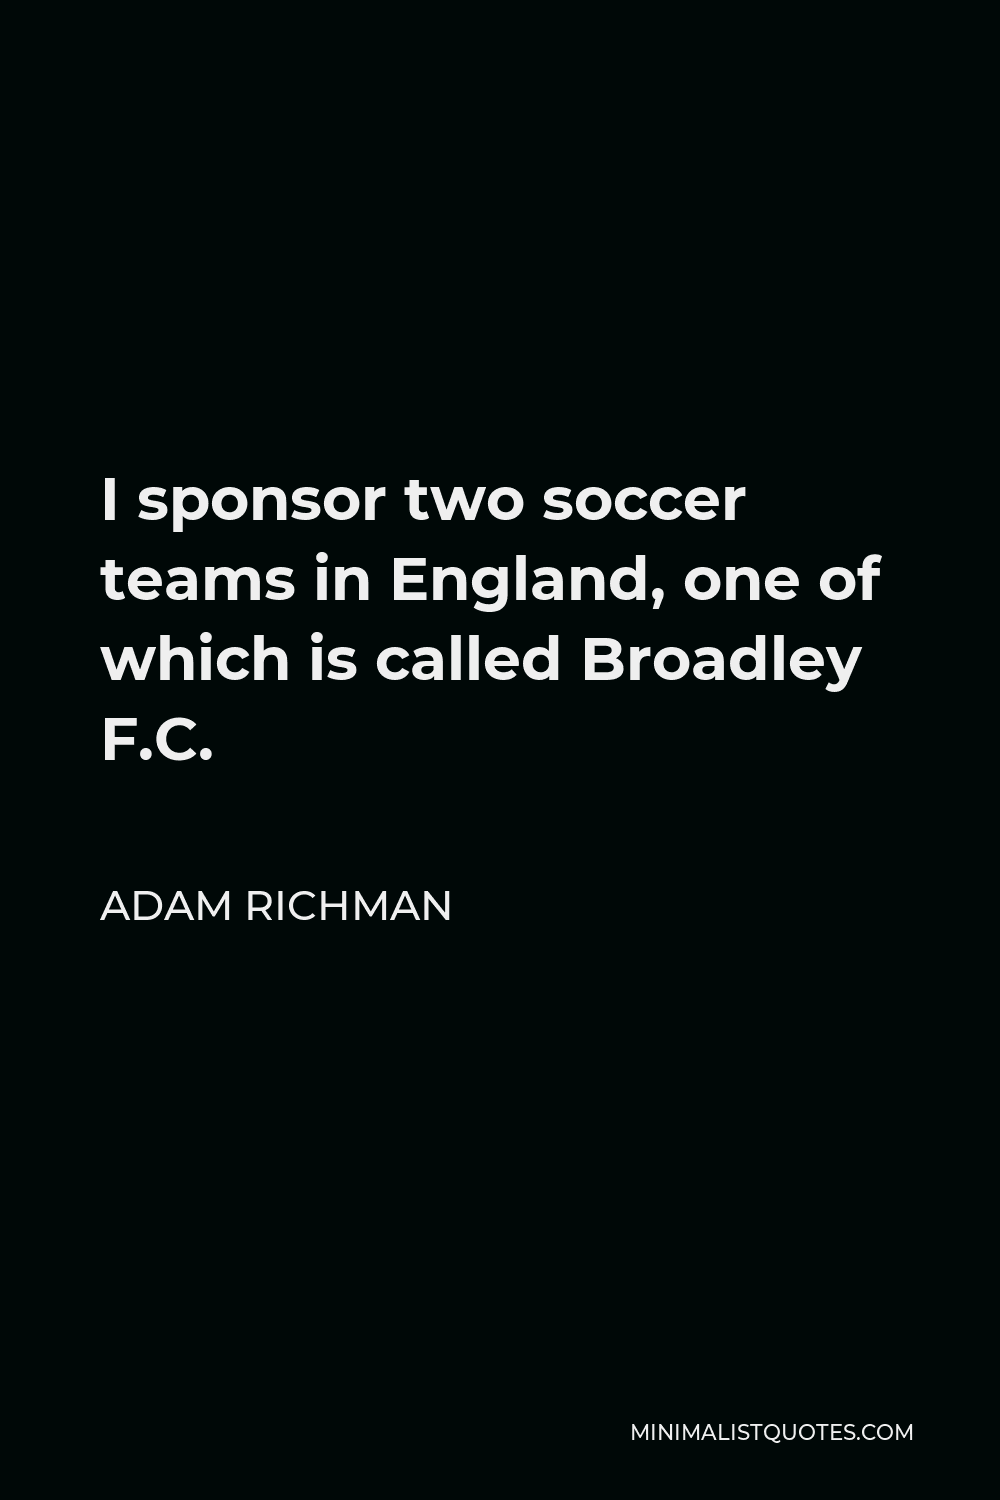 Adam Richman Quote - I sponsor two soccer teams in England, one of which is called Broadley F.C.